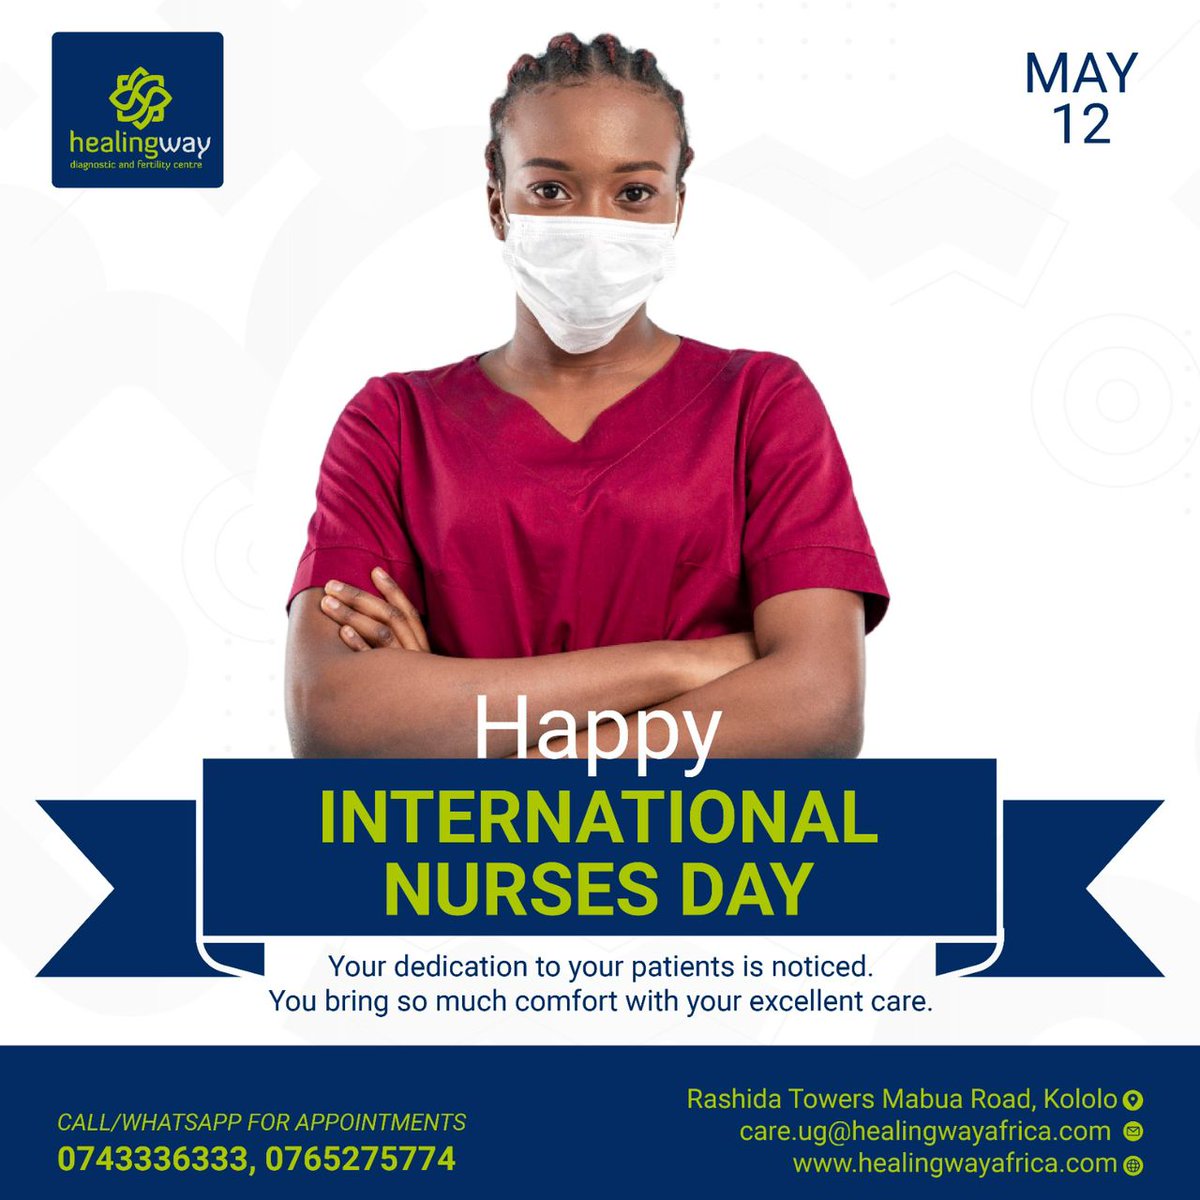 Today, we honor the incredible dedication and compassion of nurses. Thank you for your unwavering commitment to care, comfort, and healing. Happy International Nurses Day!  #NursesDay #HealthcareHeroes